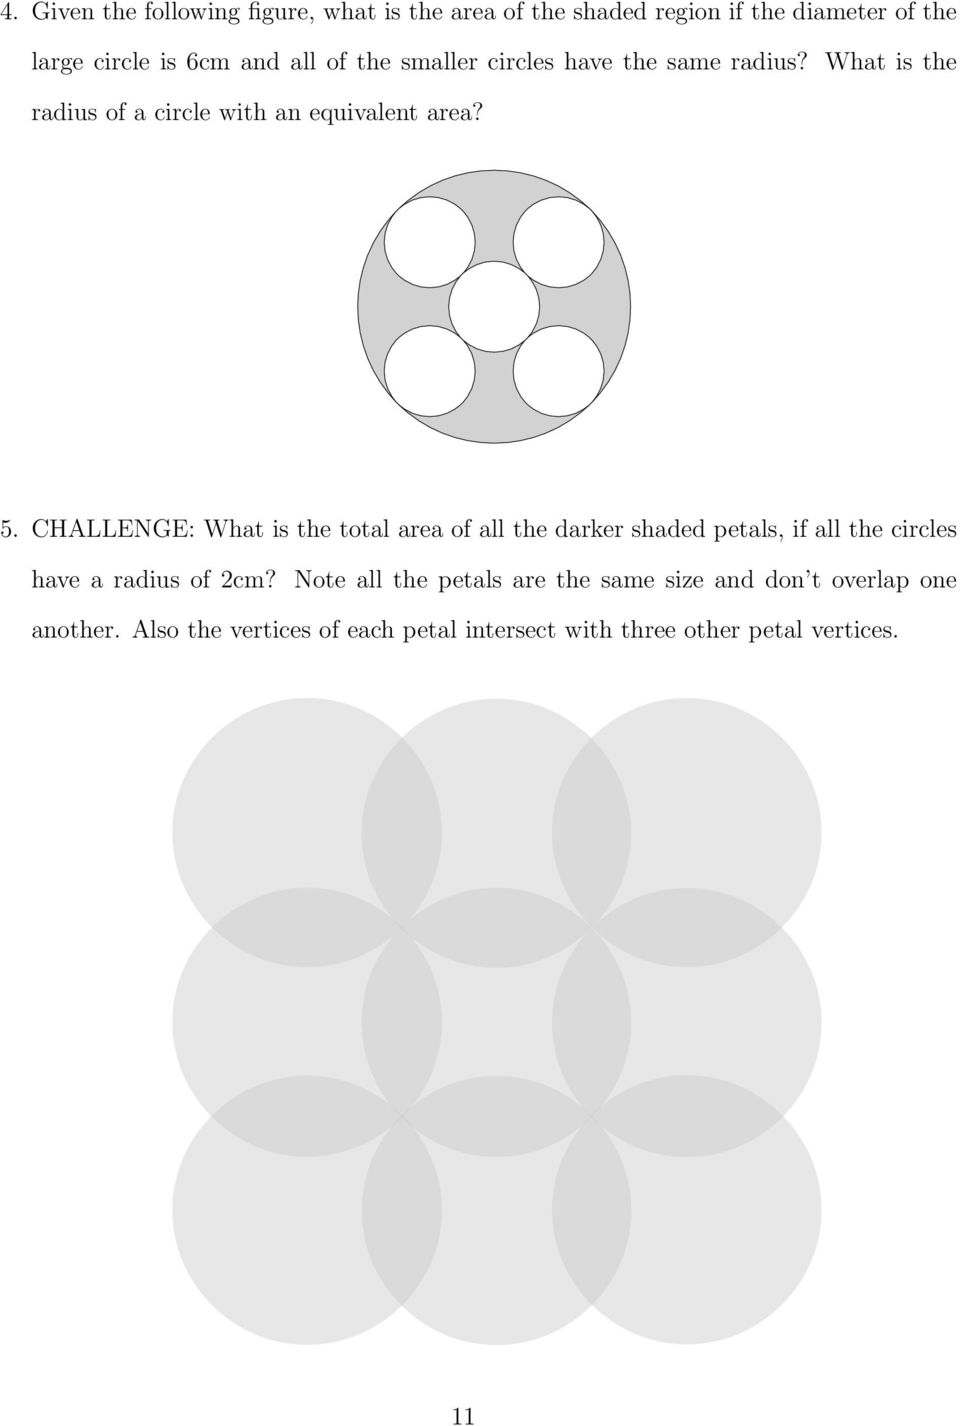 CHALLENGE: What is the total area of all the darker shaded petals, if all the circles have a radius of 2cm?